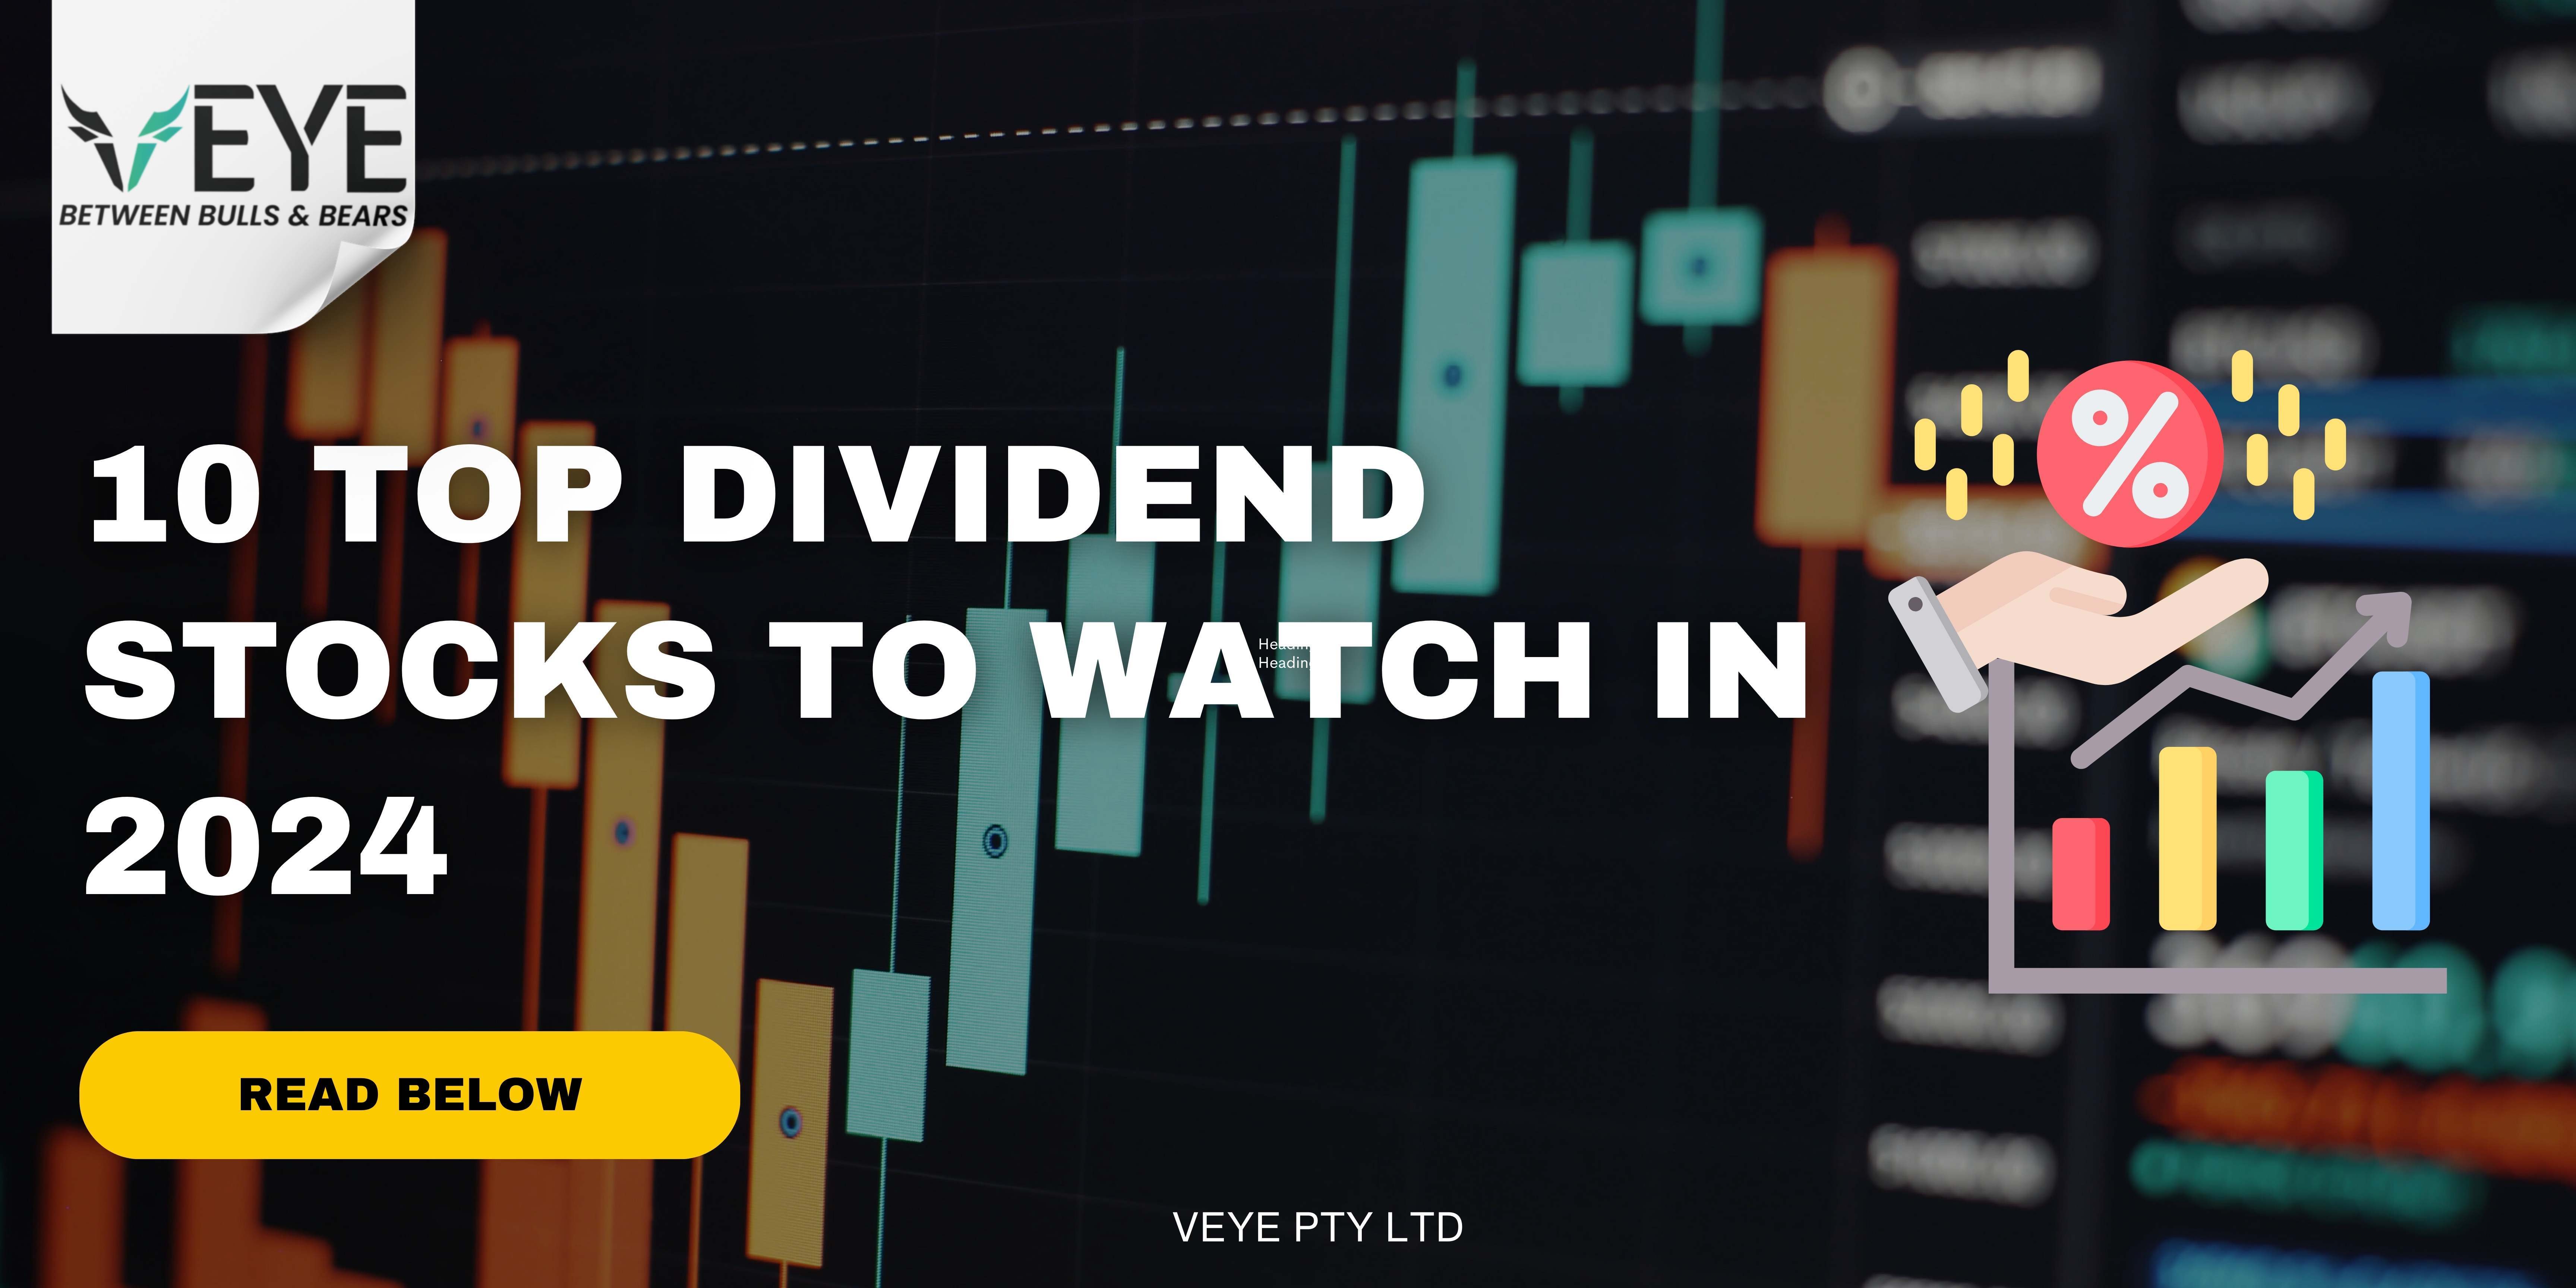 10 Top Dividend Stocks to Watch in 2024? Veye